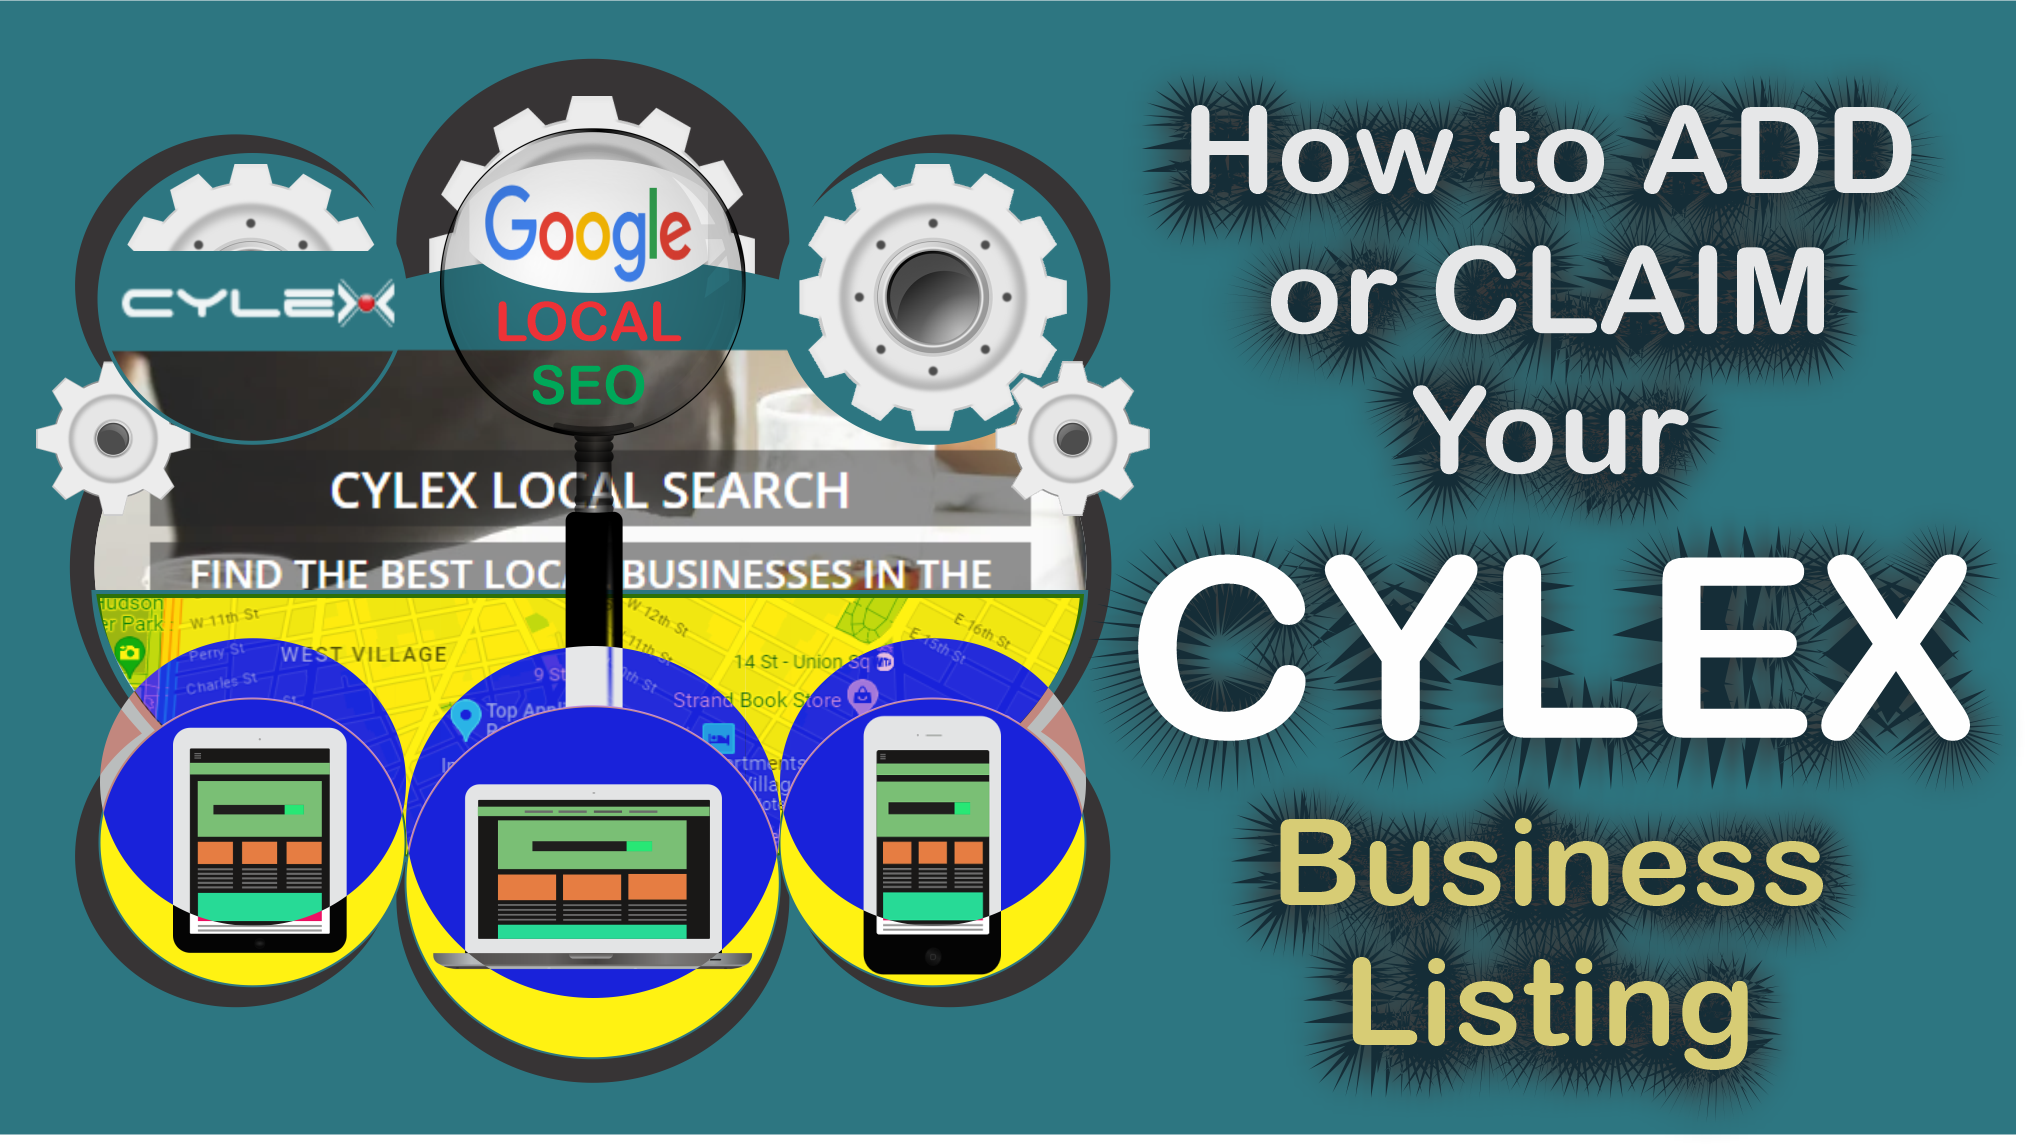 How to Add or Claim Your Cylex Business Listing